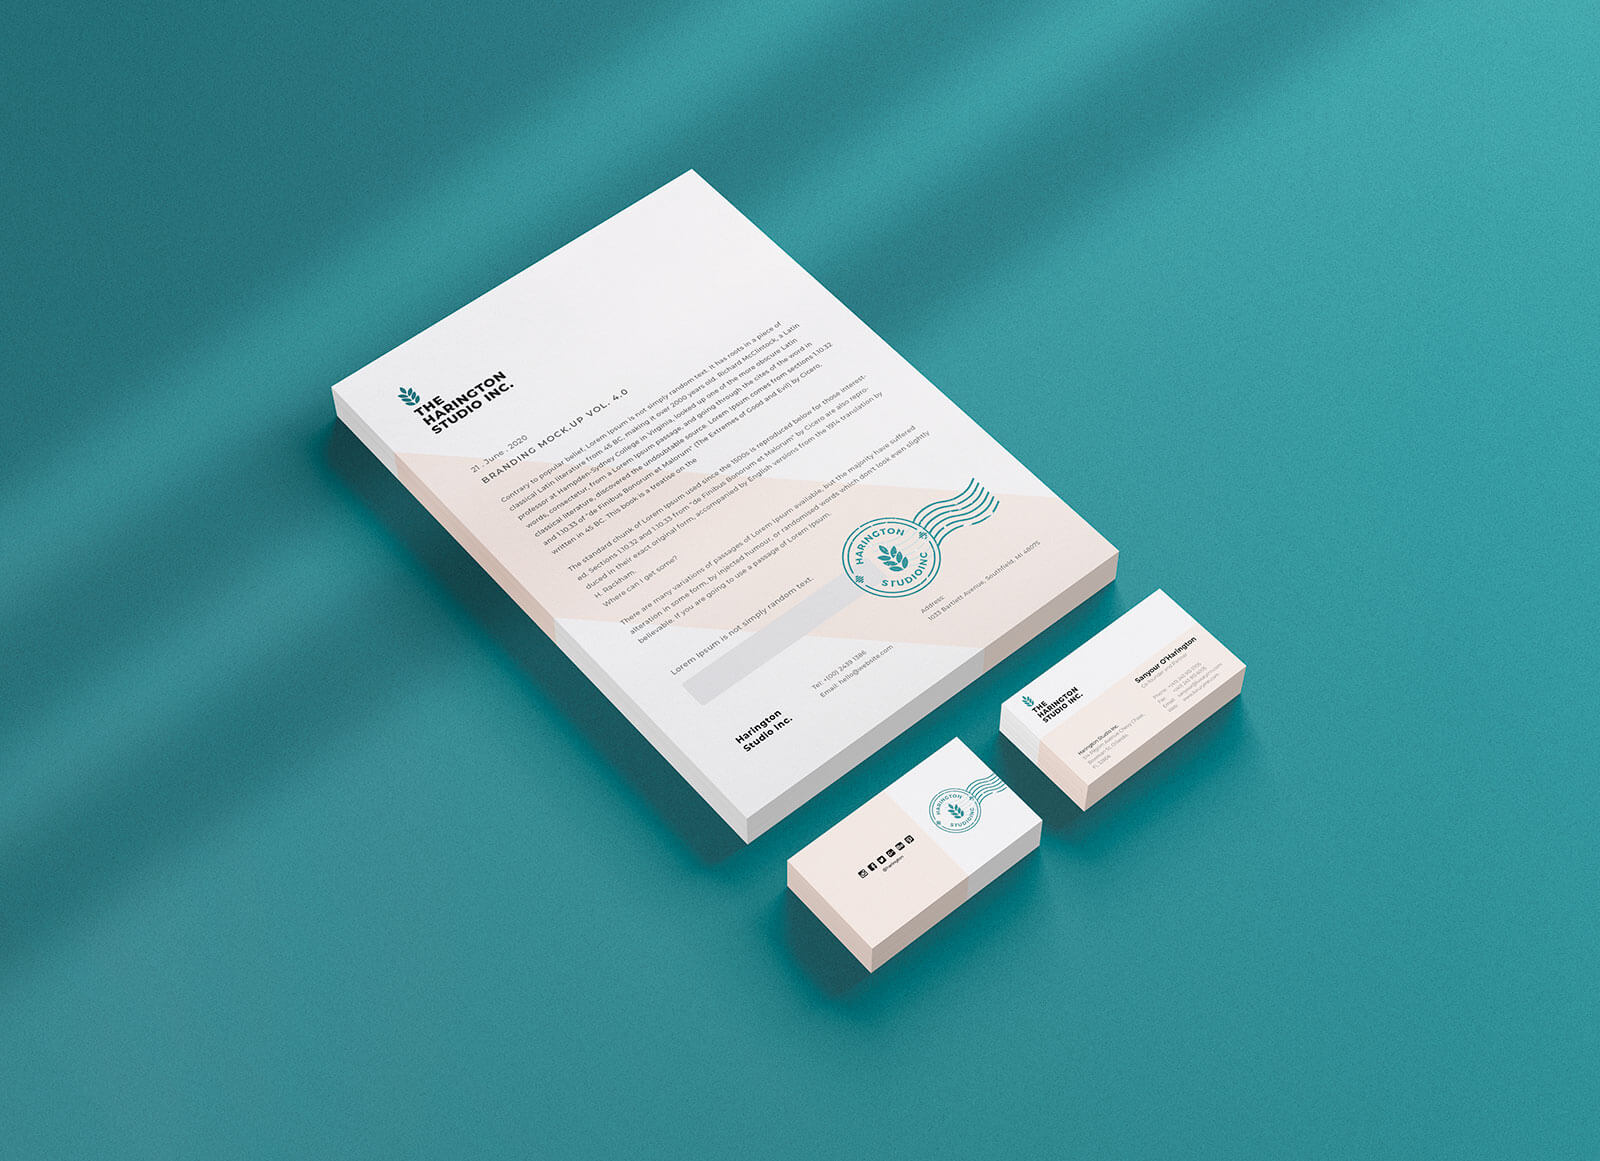 Download Free Isometric Stacked Letterhead & Business Card Stationery Mockup PSD - Good Mockups